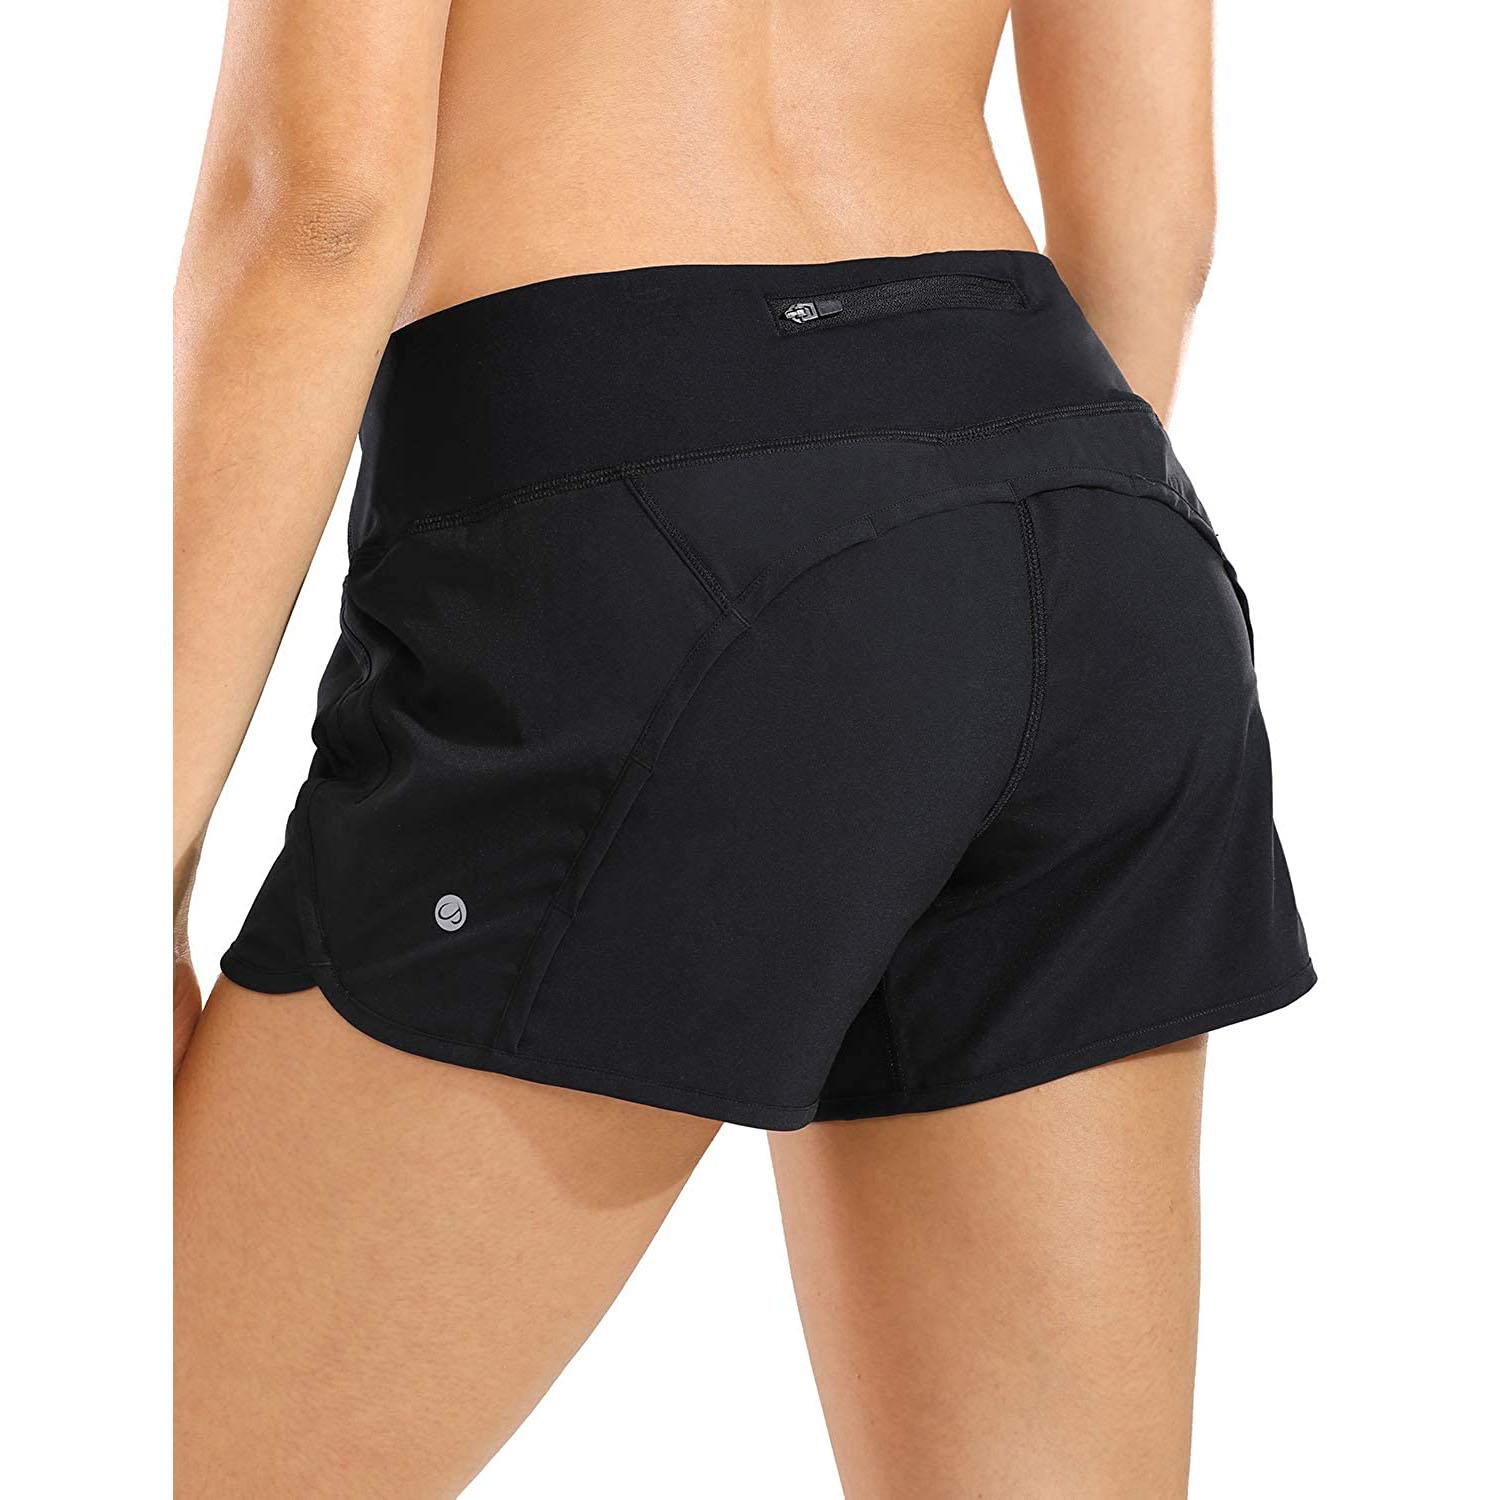 CRZ YOGA Womens Quick Dry Athletic Sports Apparel for $16.80